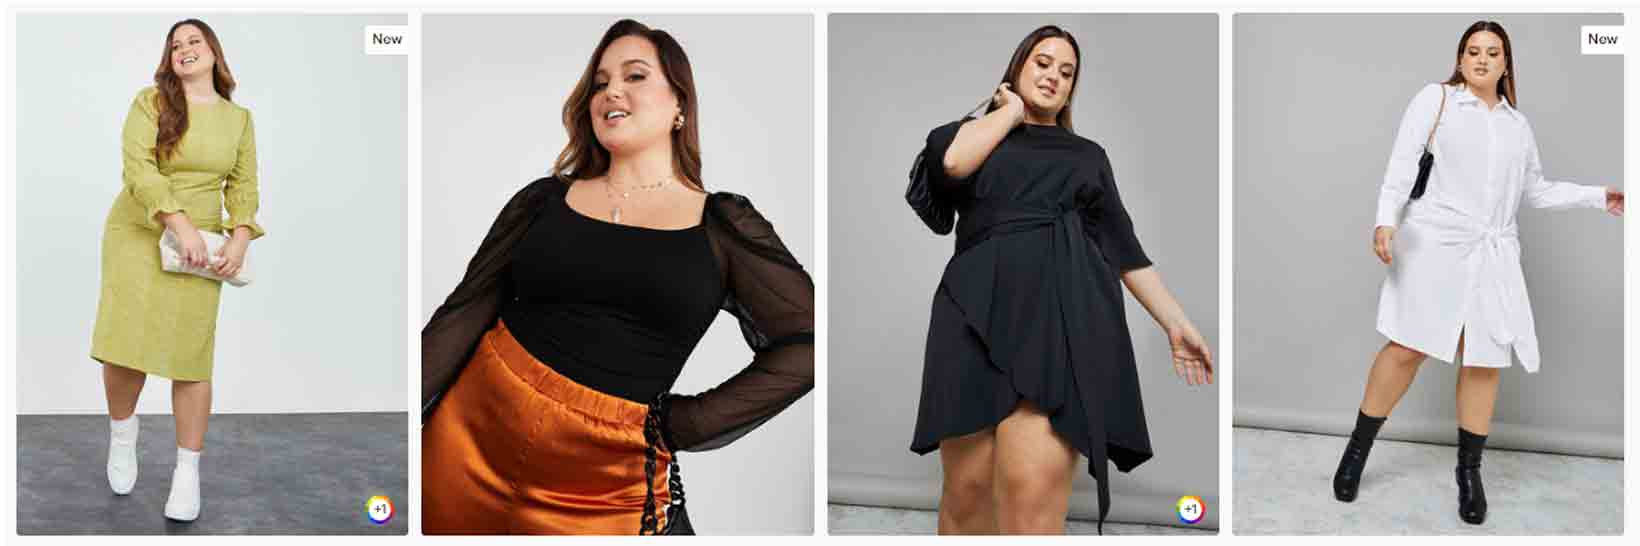 Styli plus-size clothing offer